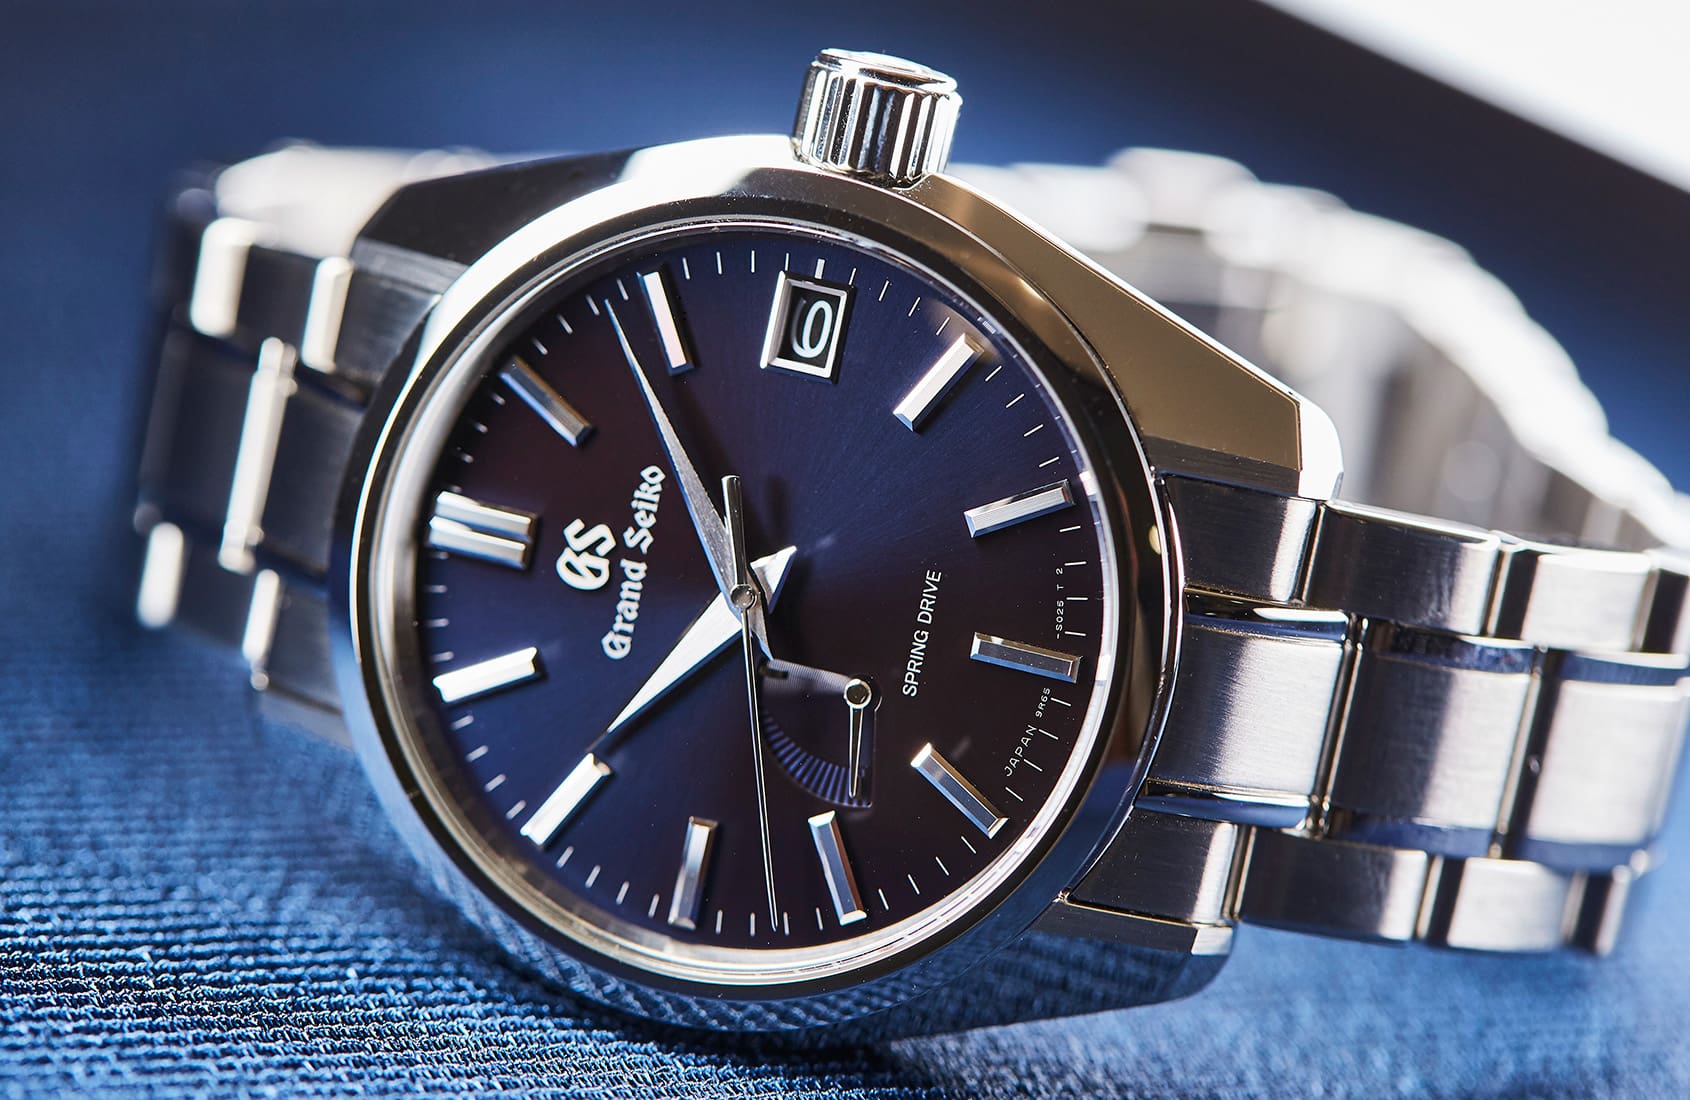 HANDS-ON: Everyday simplicity done right – the Grand Seiko Spring Drive SBGA375 and Watches